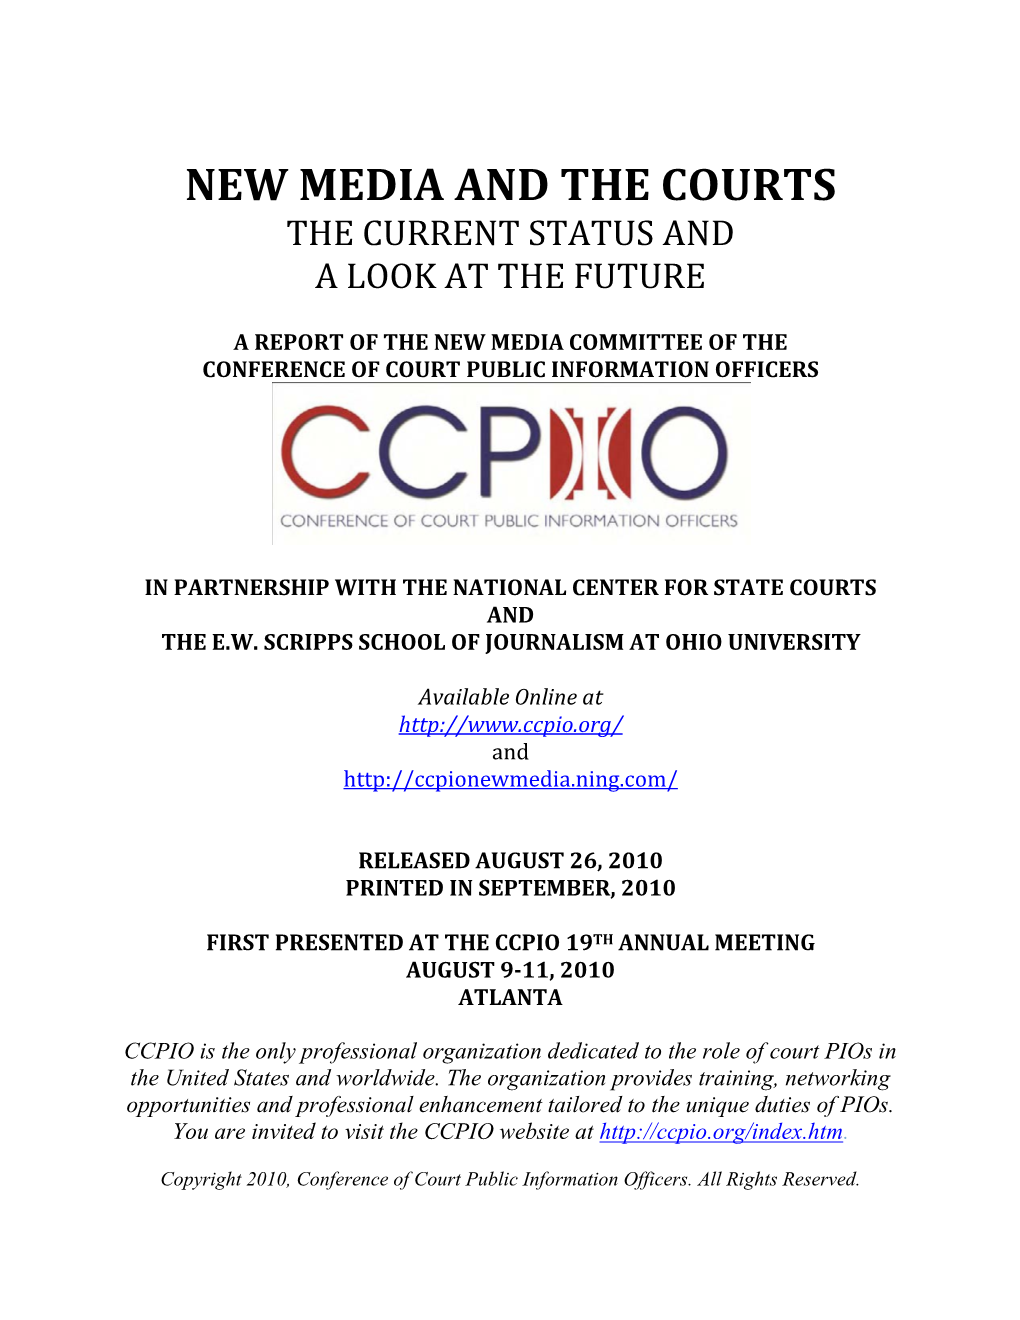 New Media and the Courts the Current Status and a Look at the Future